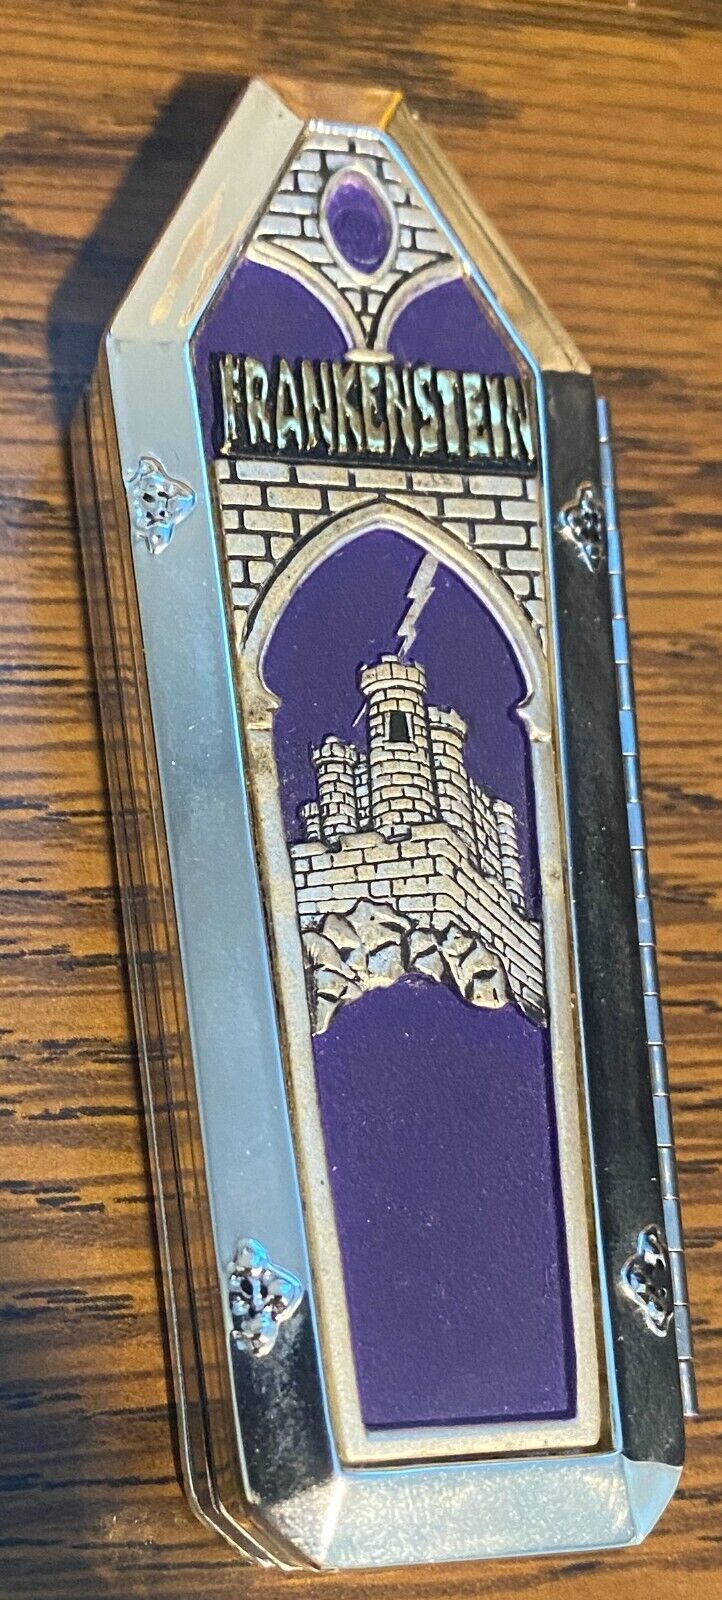 Franklin Mint Frankenstein Collector’s Knife No Pouch Or Box